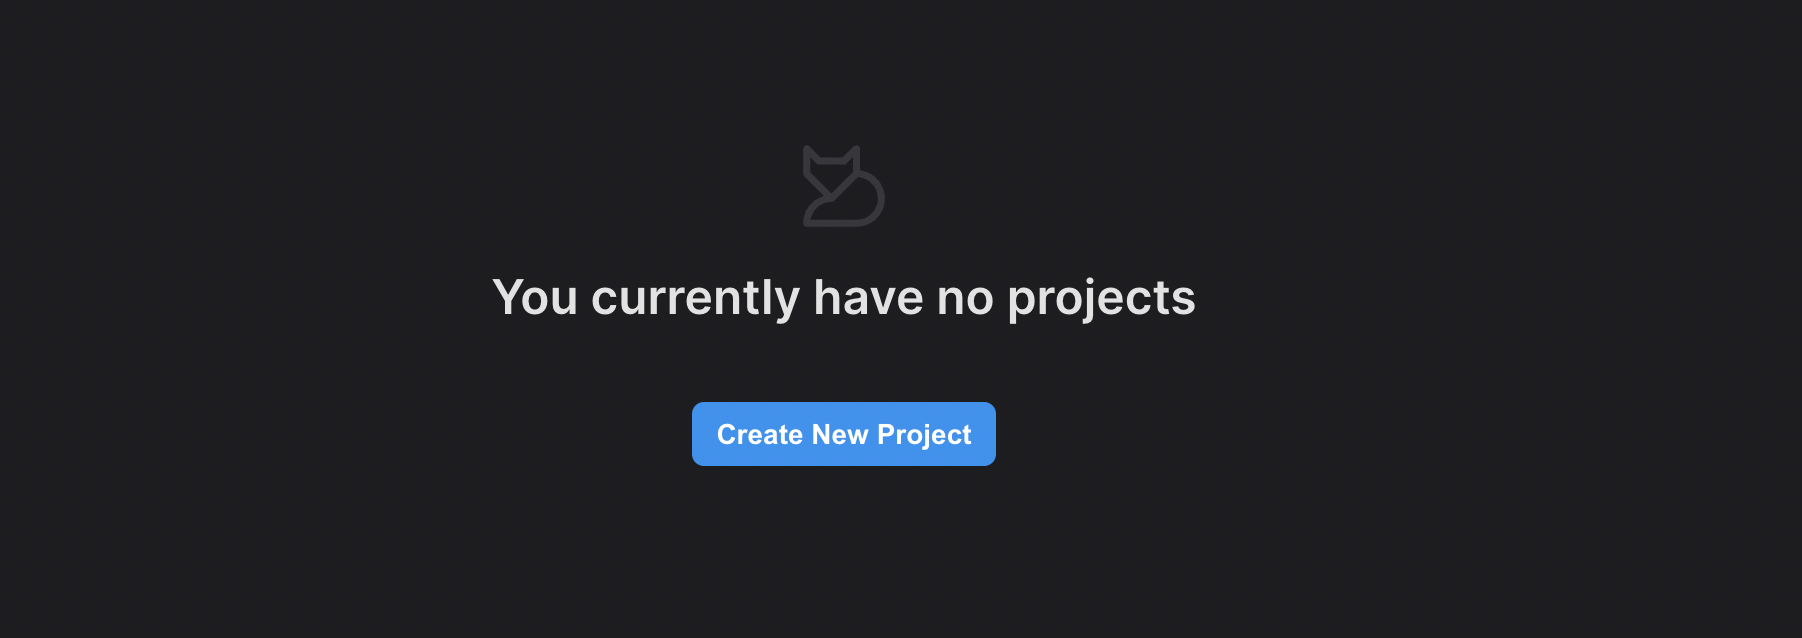 The "Create new Project" button